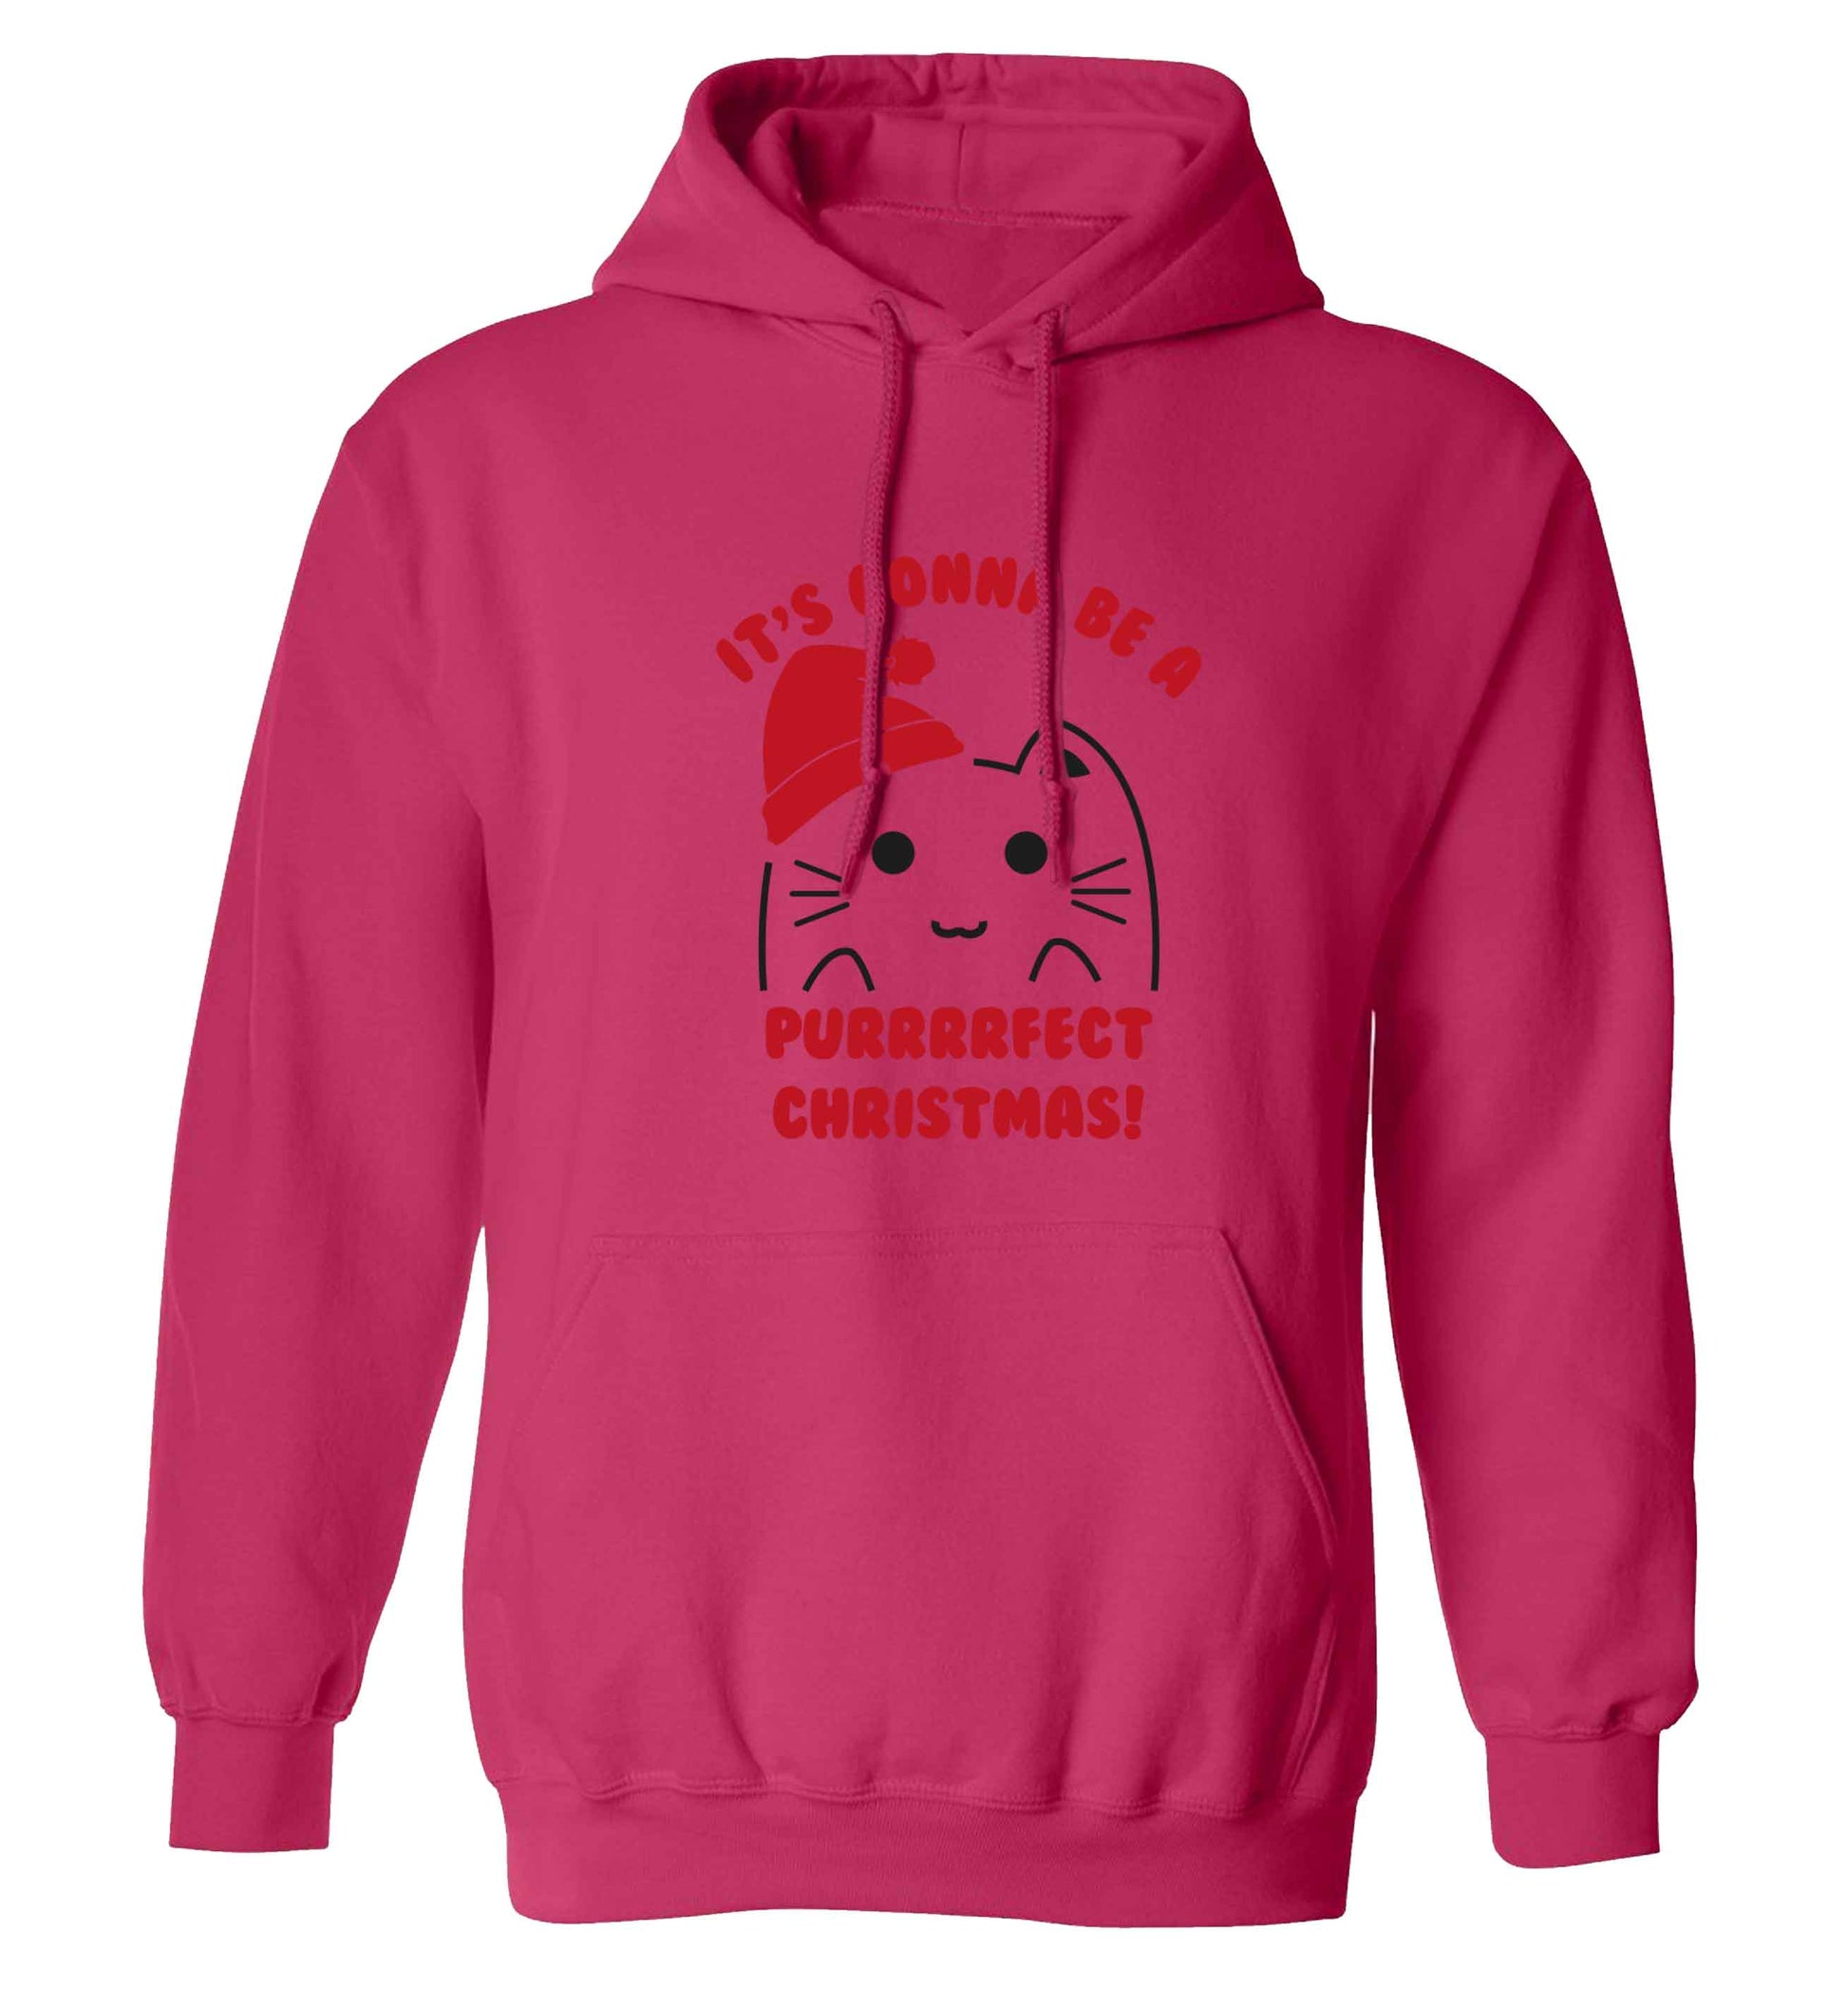 It's going to be a purrfect Christmas adults unisex pink hoodie 2XL